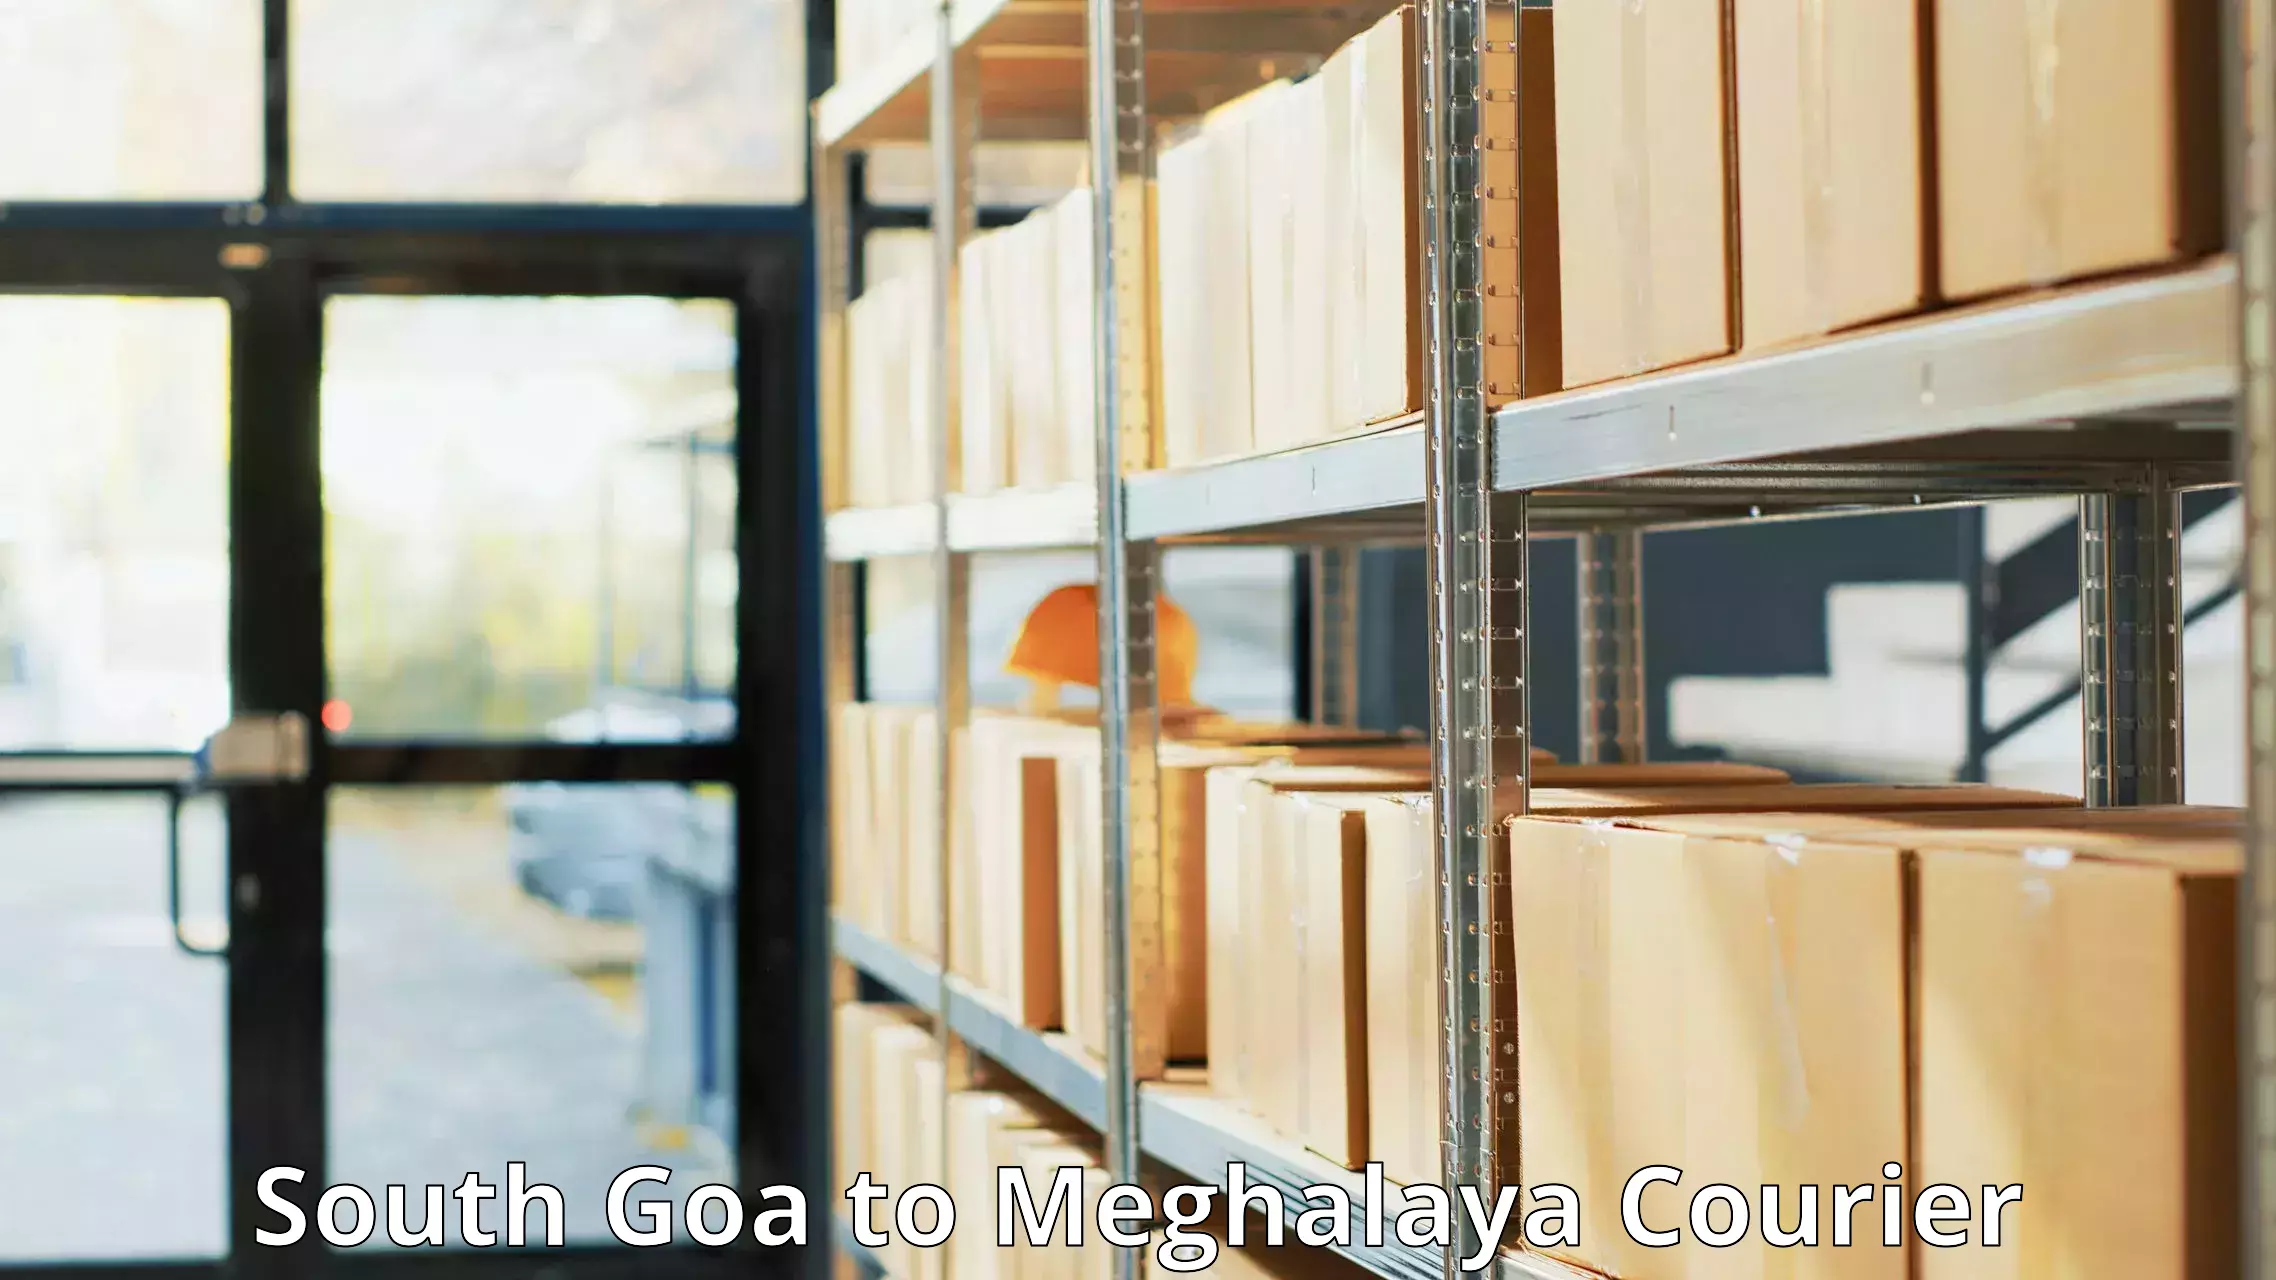 High-priority parcel service South Goa to Tura